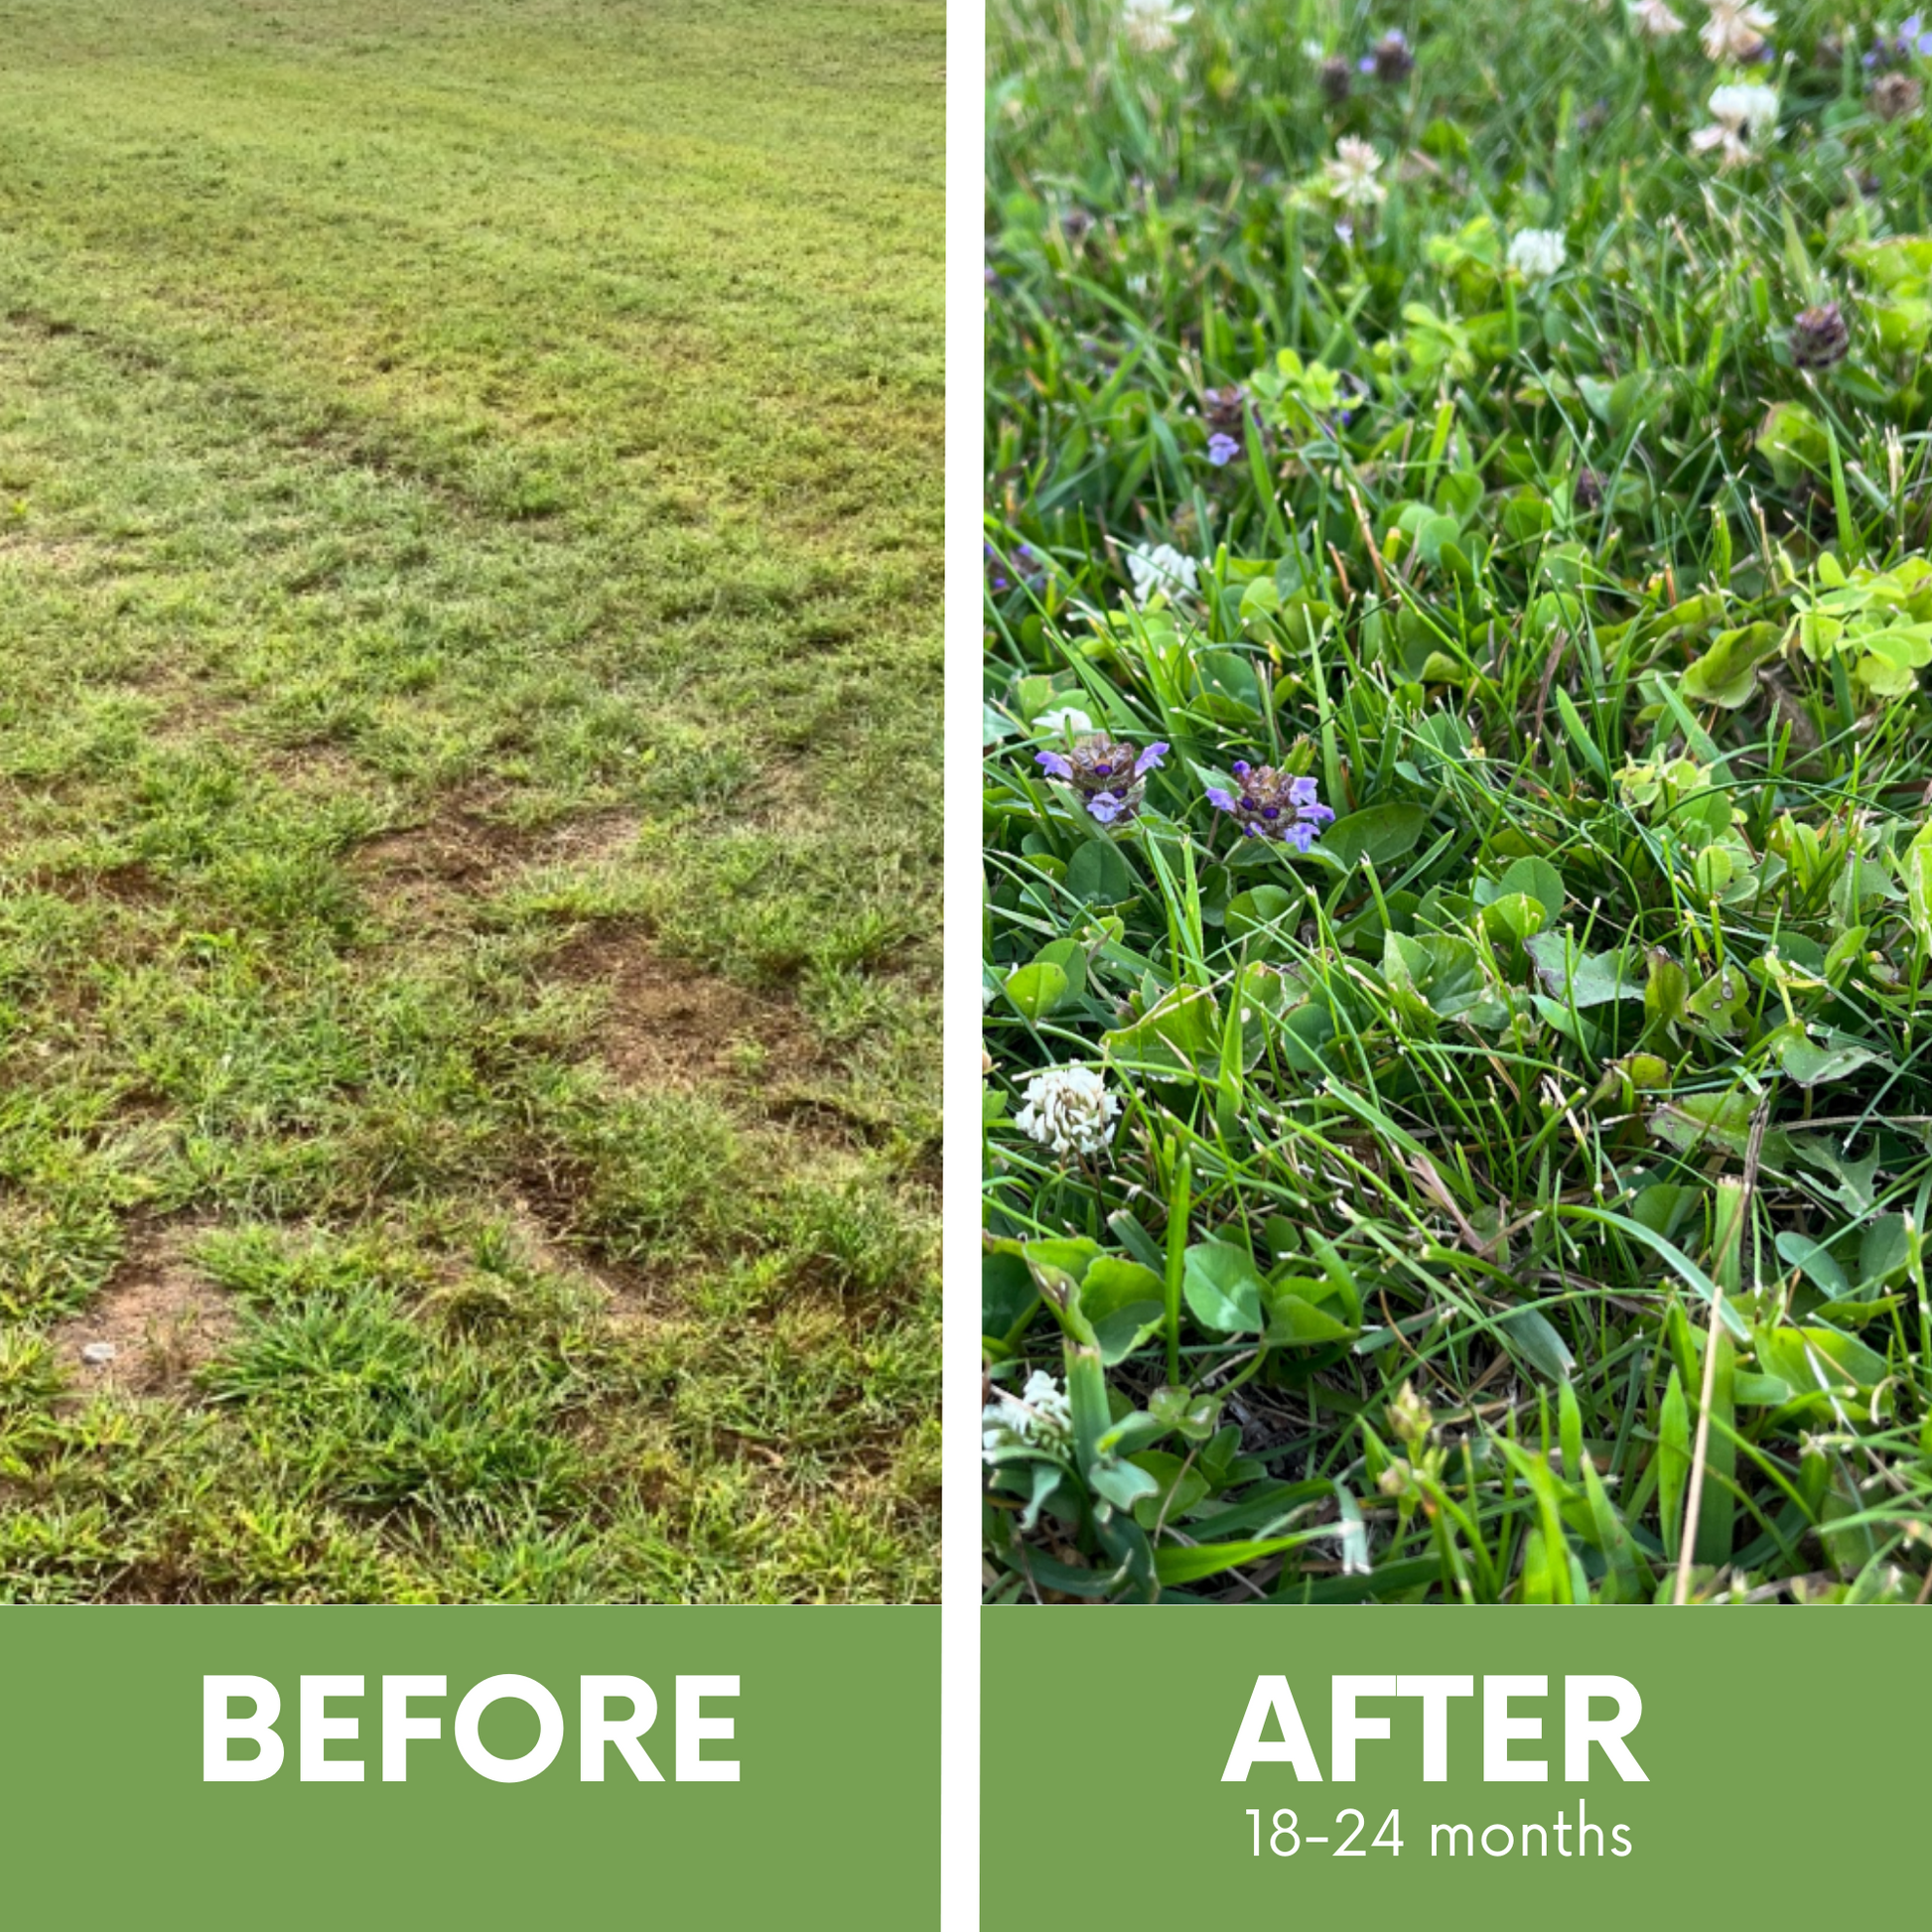 Before and after photos of Bee Lawn Flowering Pollinator Lawn, Dutch White Clover, Self-Heal, Creeping Thyme